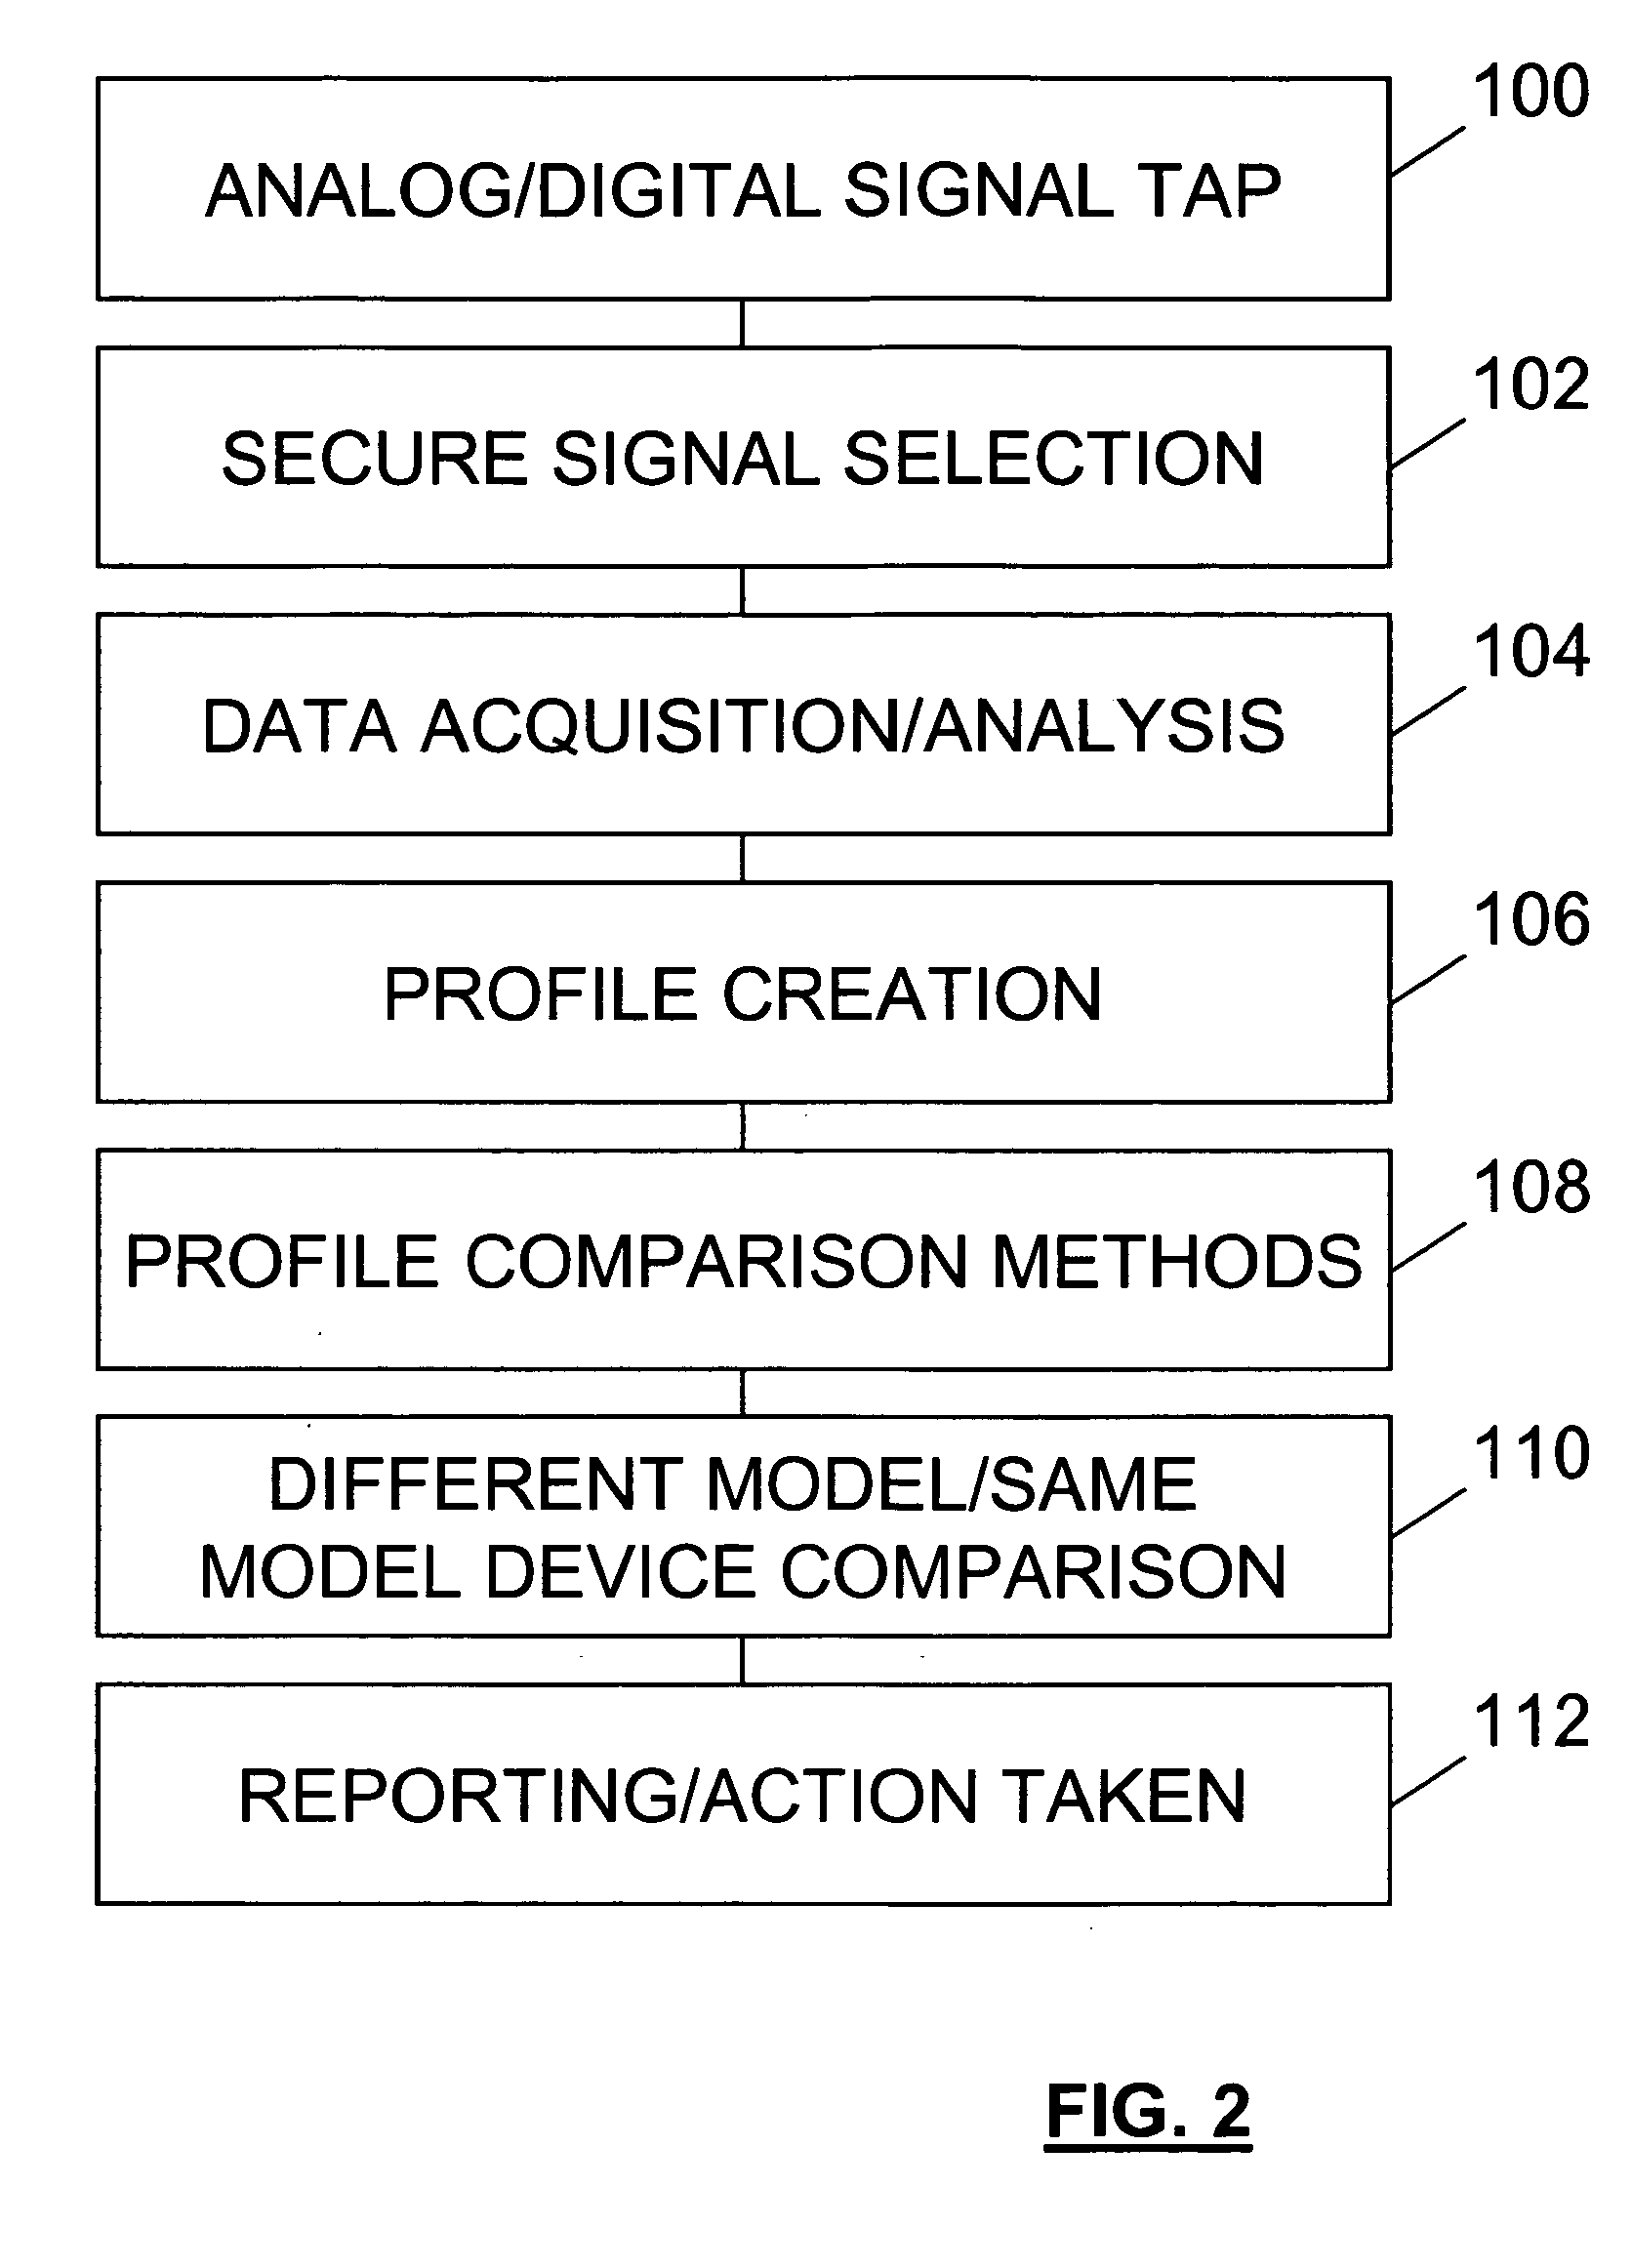 Fingerprinting digital devices using electromagnetic characteristics of their communications